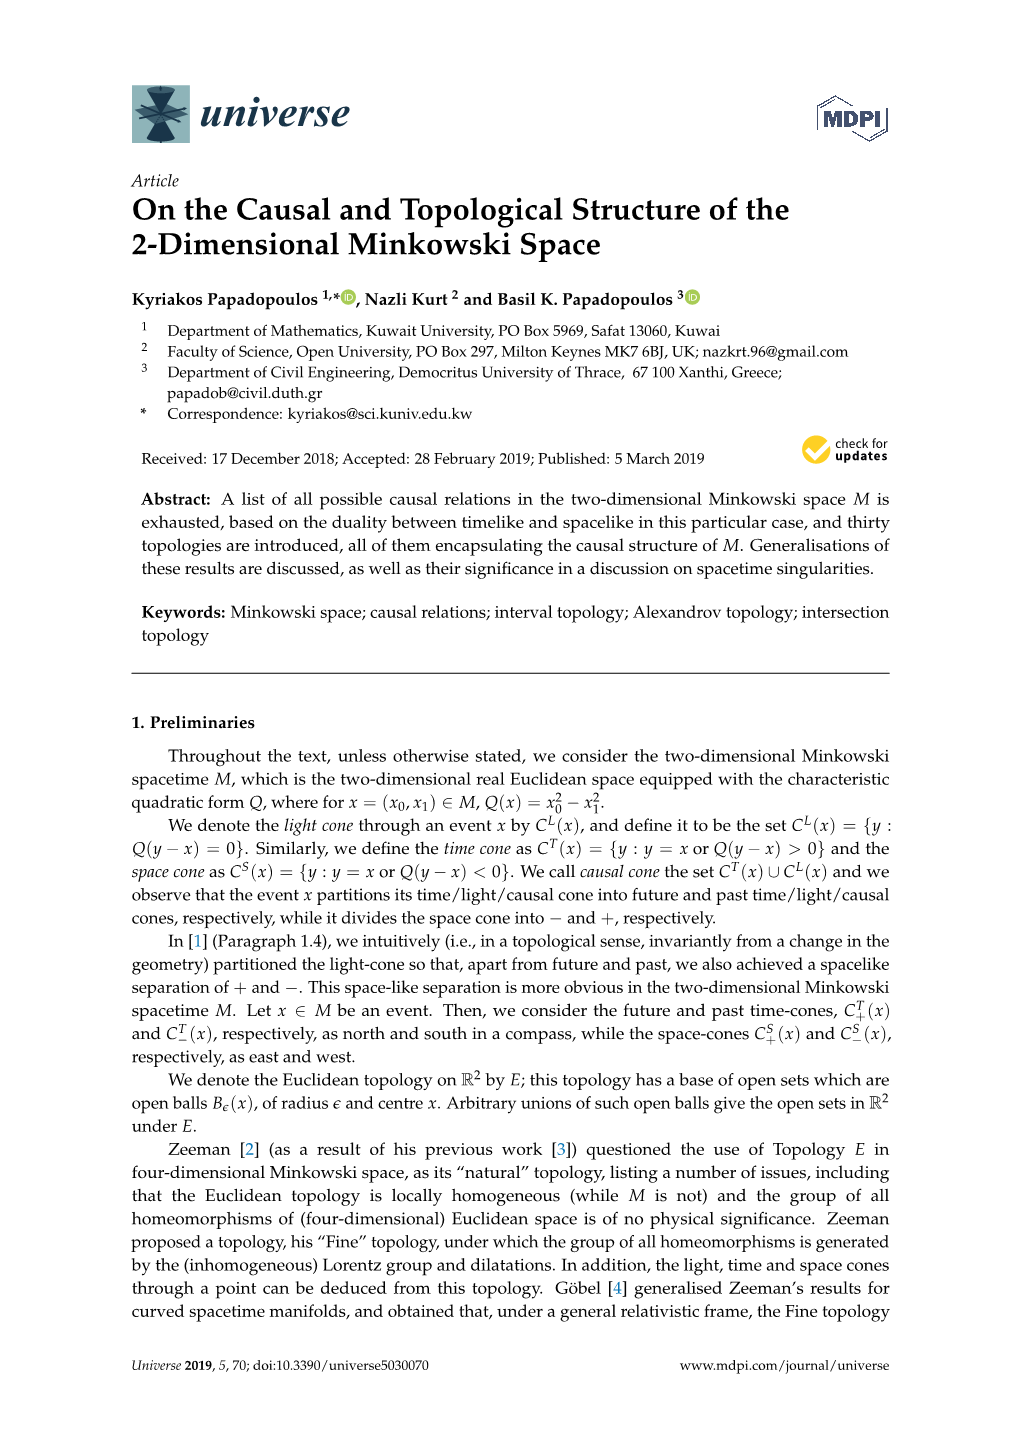 On the Causal and Topological Structure of the 2-Dimensional Minkowski Space